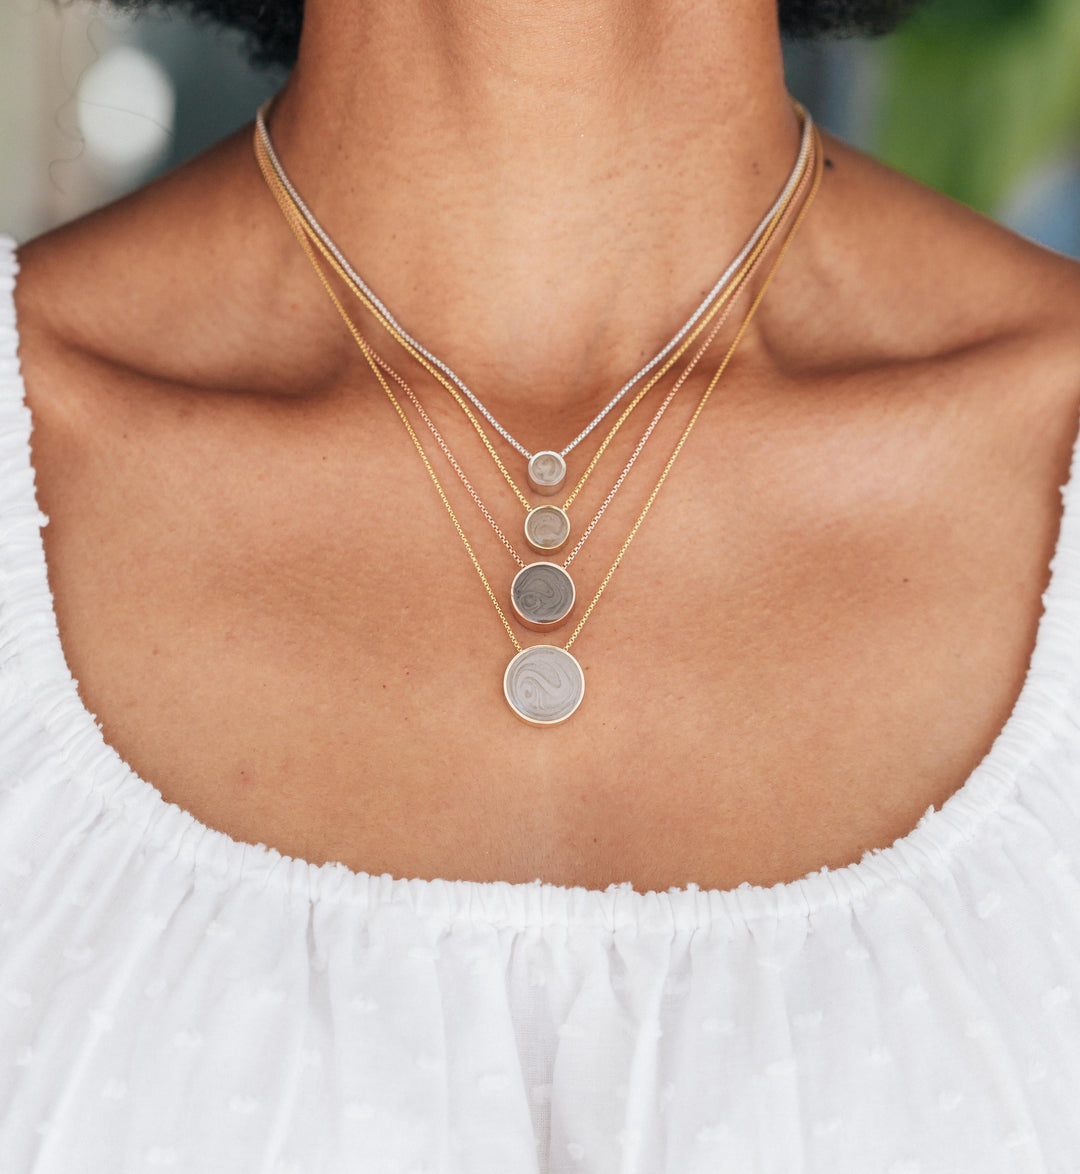 Close By Me's 6mm, 8mm, 12mm, and 15mm Sliding Solitaire Cremation Necklaces on a model. Each pendant is on a different length chain to create a layered effect that goes from smallest at the top to largest at the bottom.